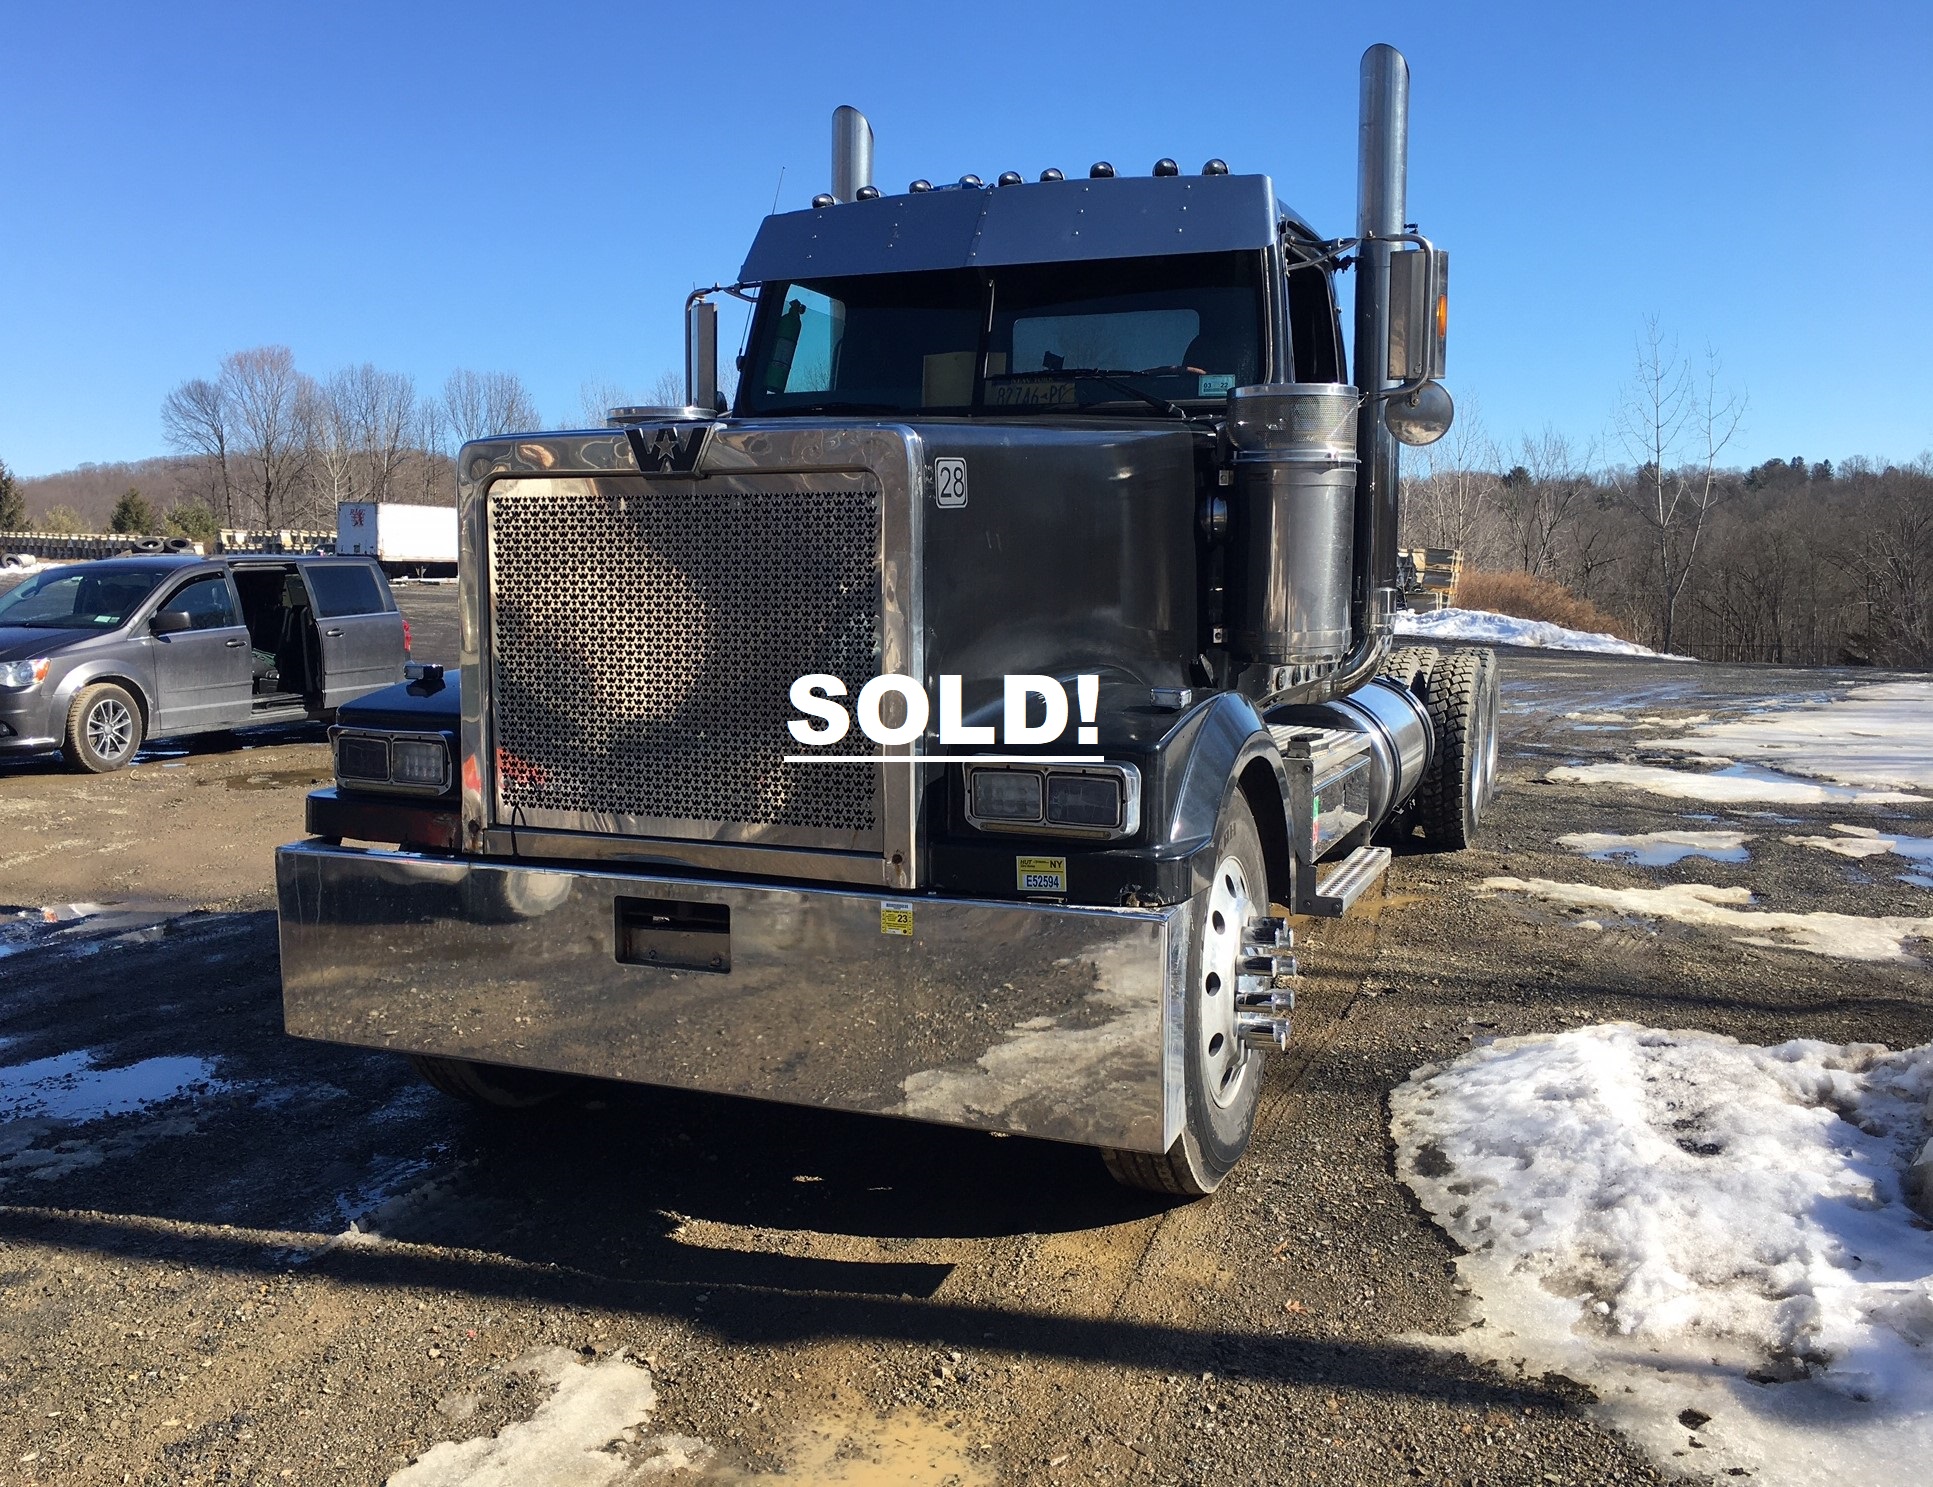 Western Star Semi Truck. 2000 year model tractor with a Caterpillar C15 475 engine with 502244 miles and a 13 speed Eaton Fuller transmission with 370/40'000 lb. rears and 14k fronts. 260 Inch wheelbase. Three stage engine break and a wetline PTO and single stage line pump attached. Newer tires, new radiator and new shocks all around along with Air ride driver seat, heat, "ice cold AC", and power windows. Nice work/day cab truck. No DEF.